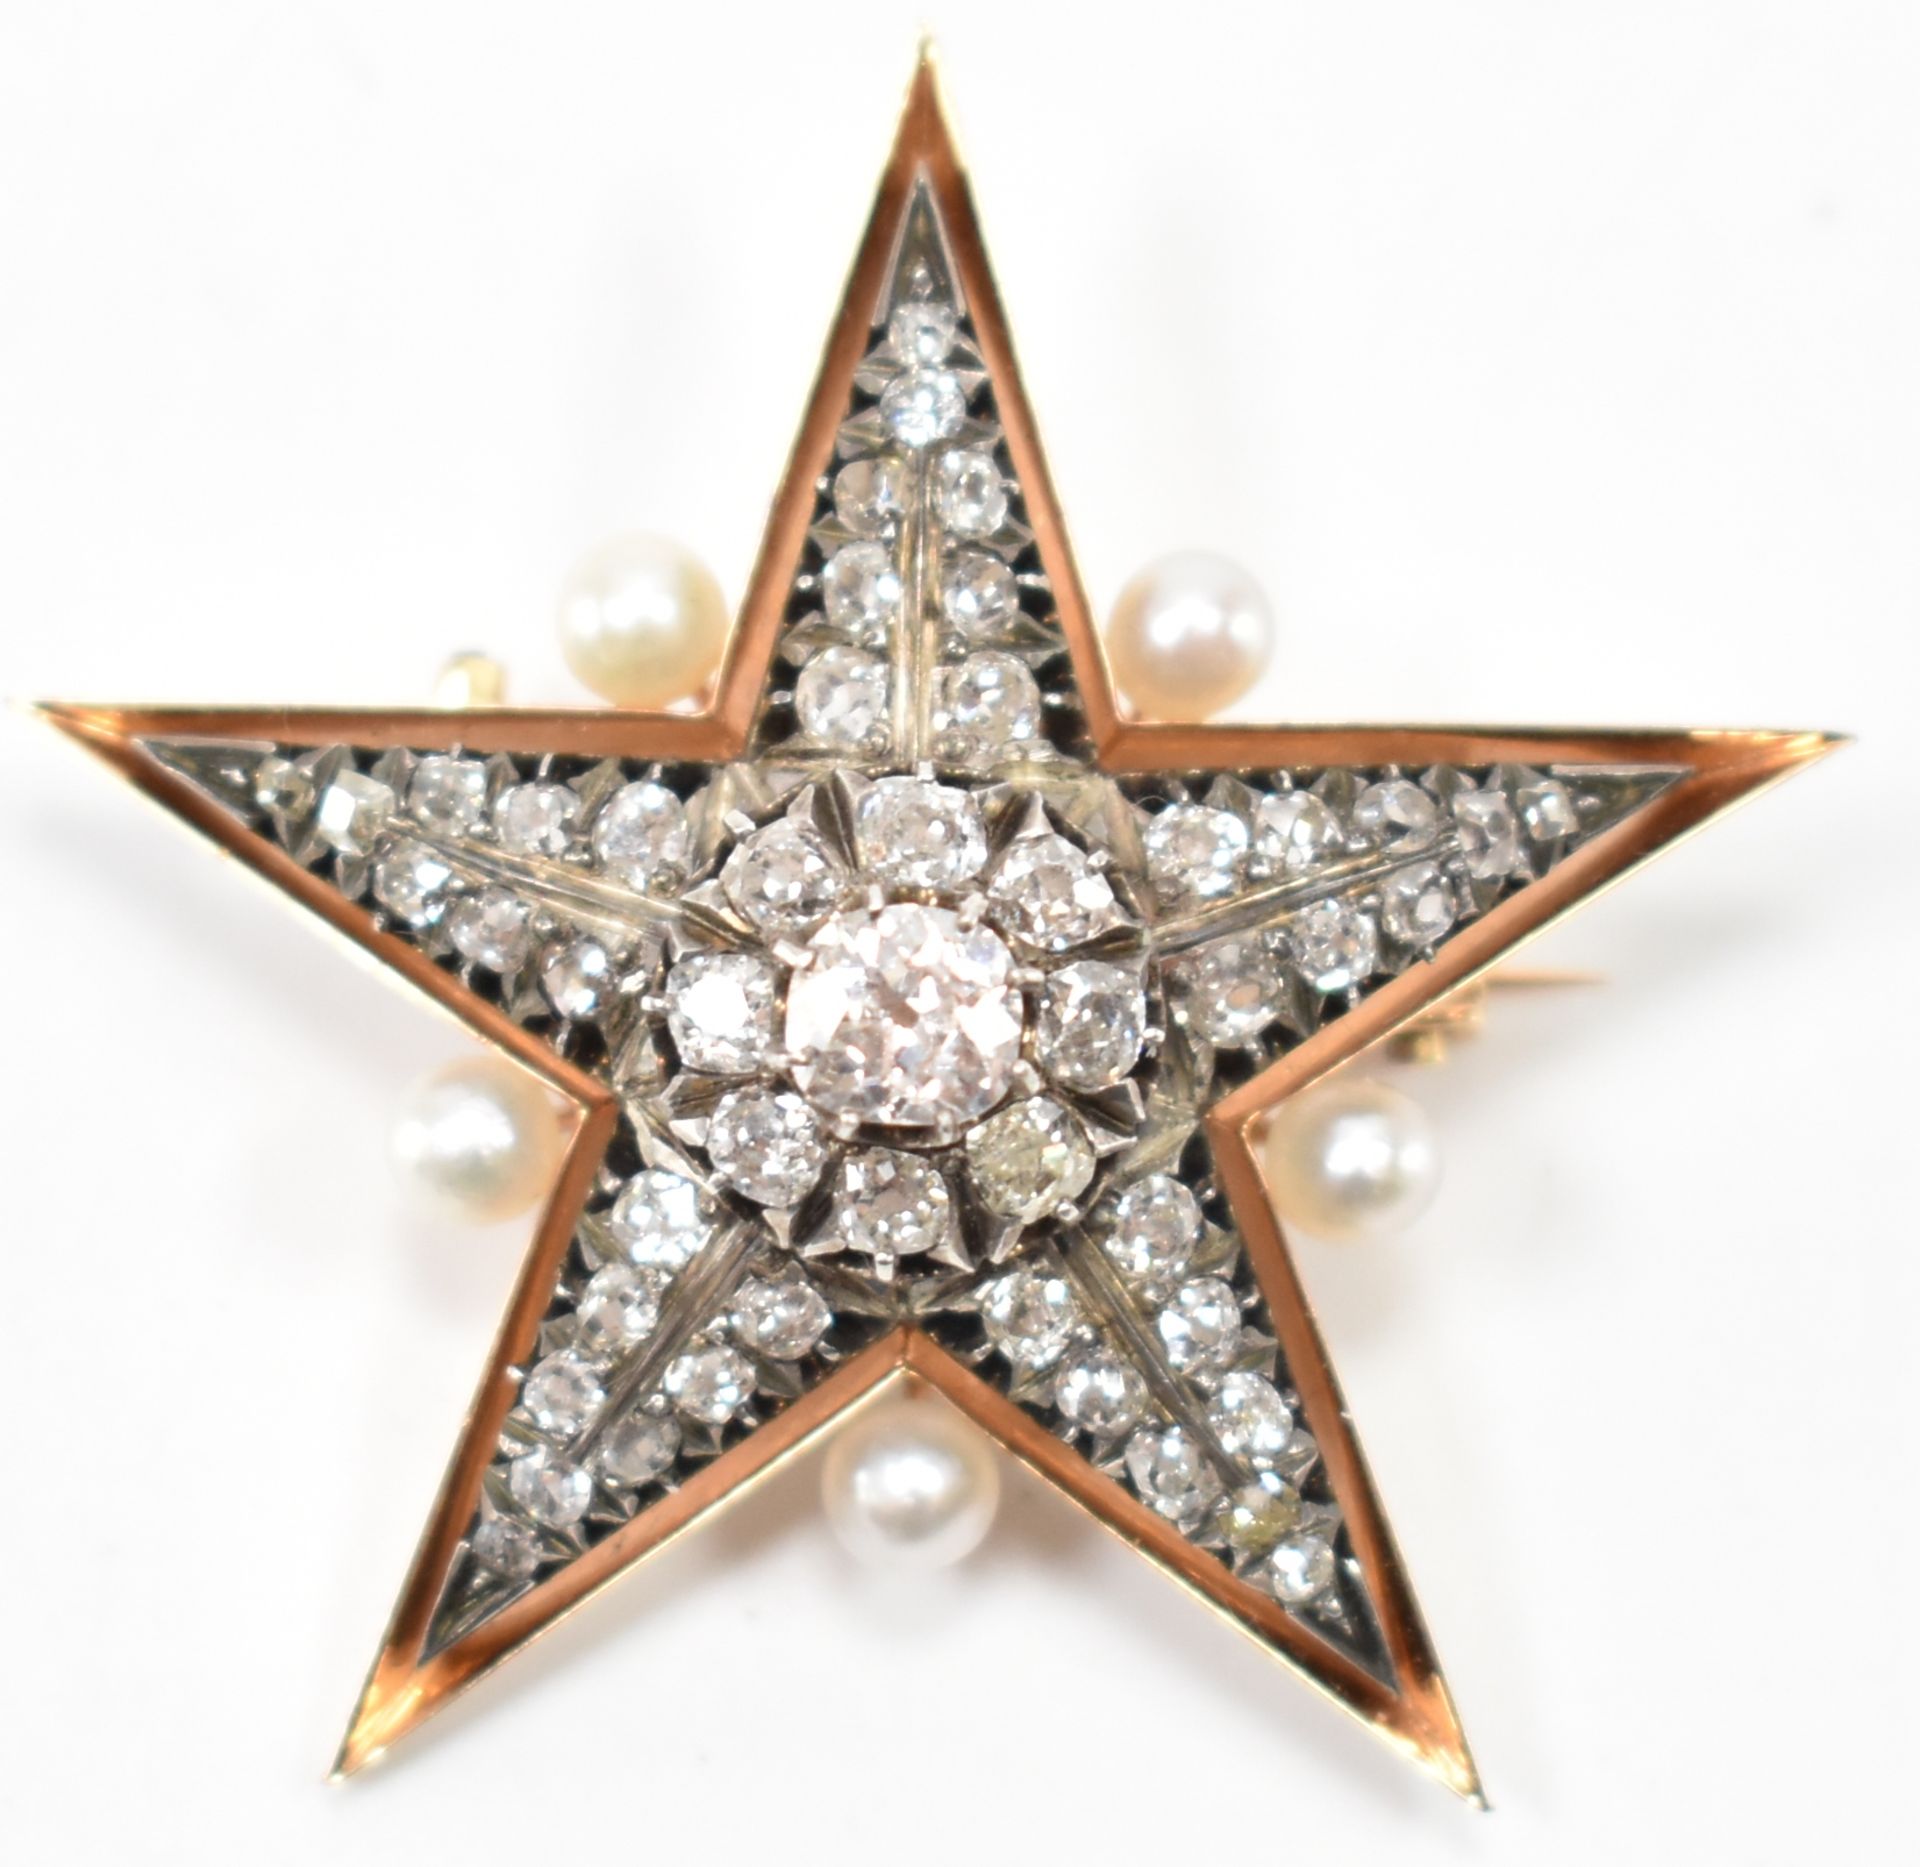 EARLY 20TH CENTURY DIAMOND & PEARL STAR BROOCH - Image 2 of 6